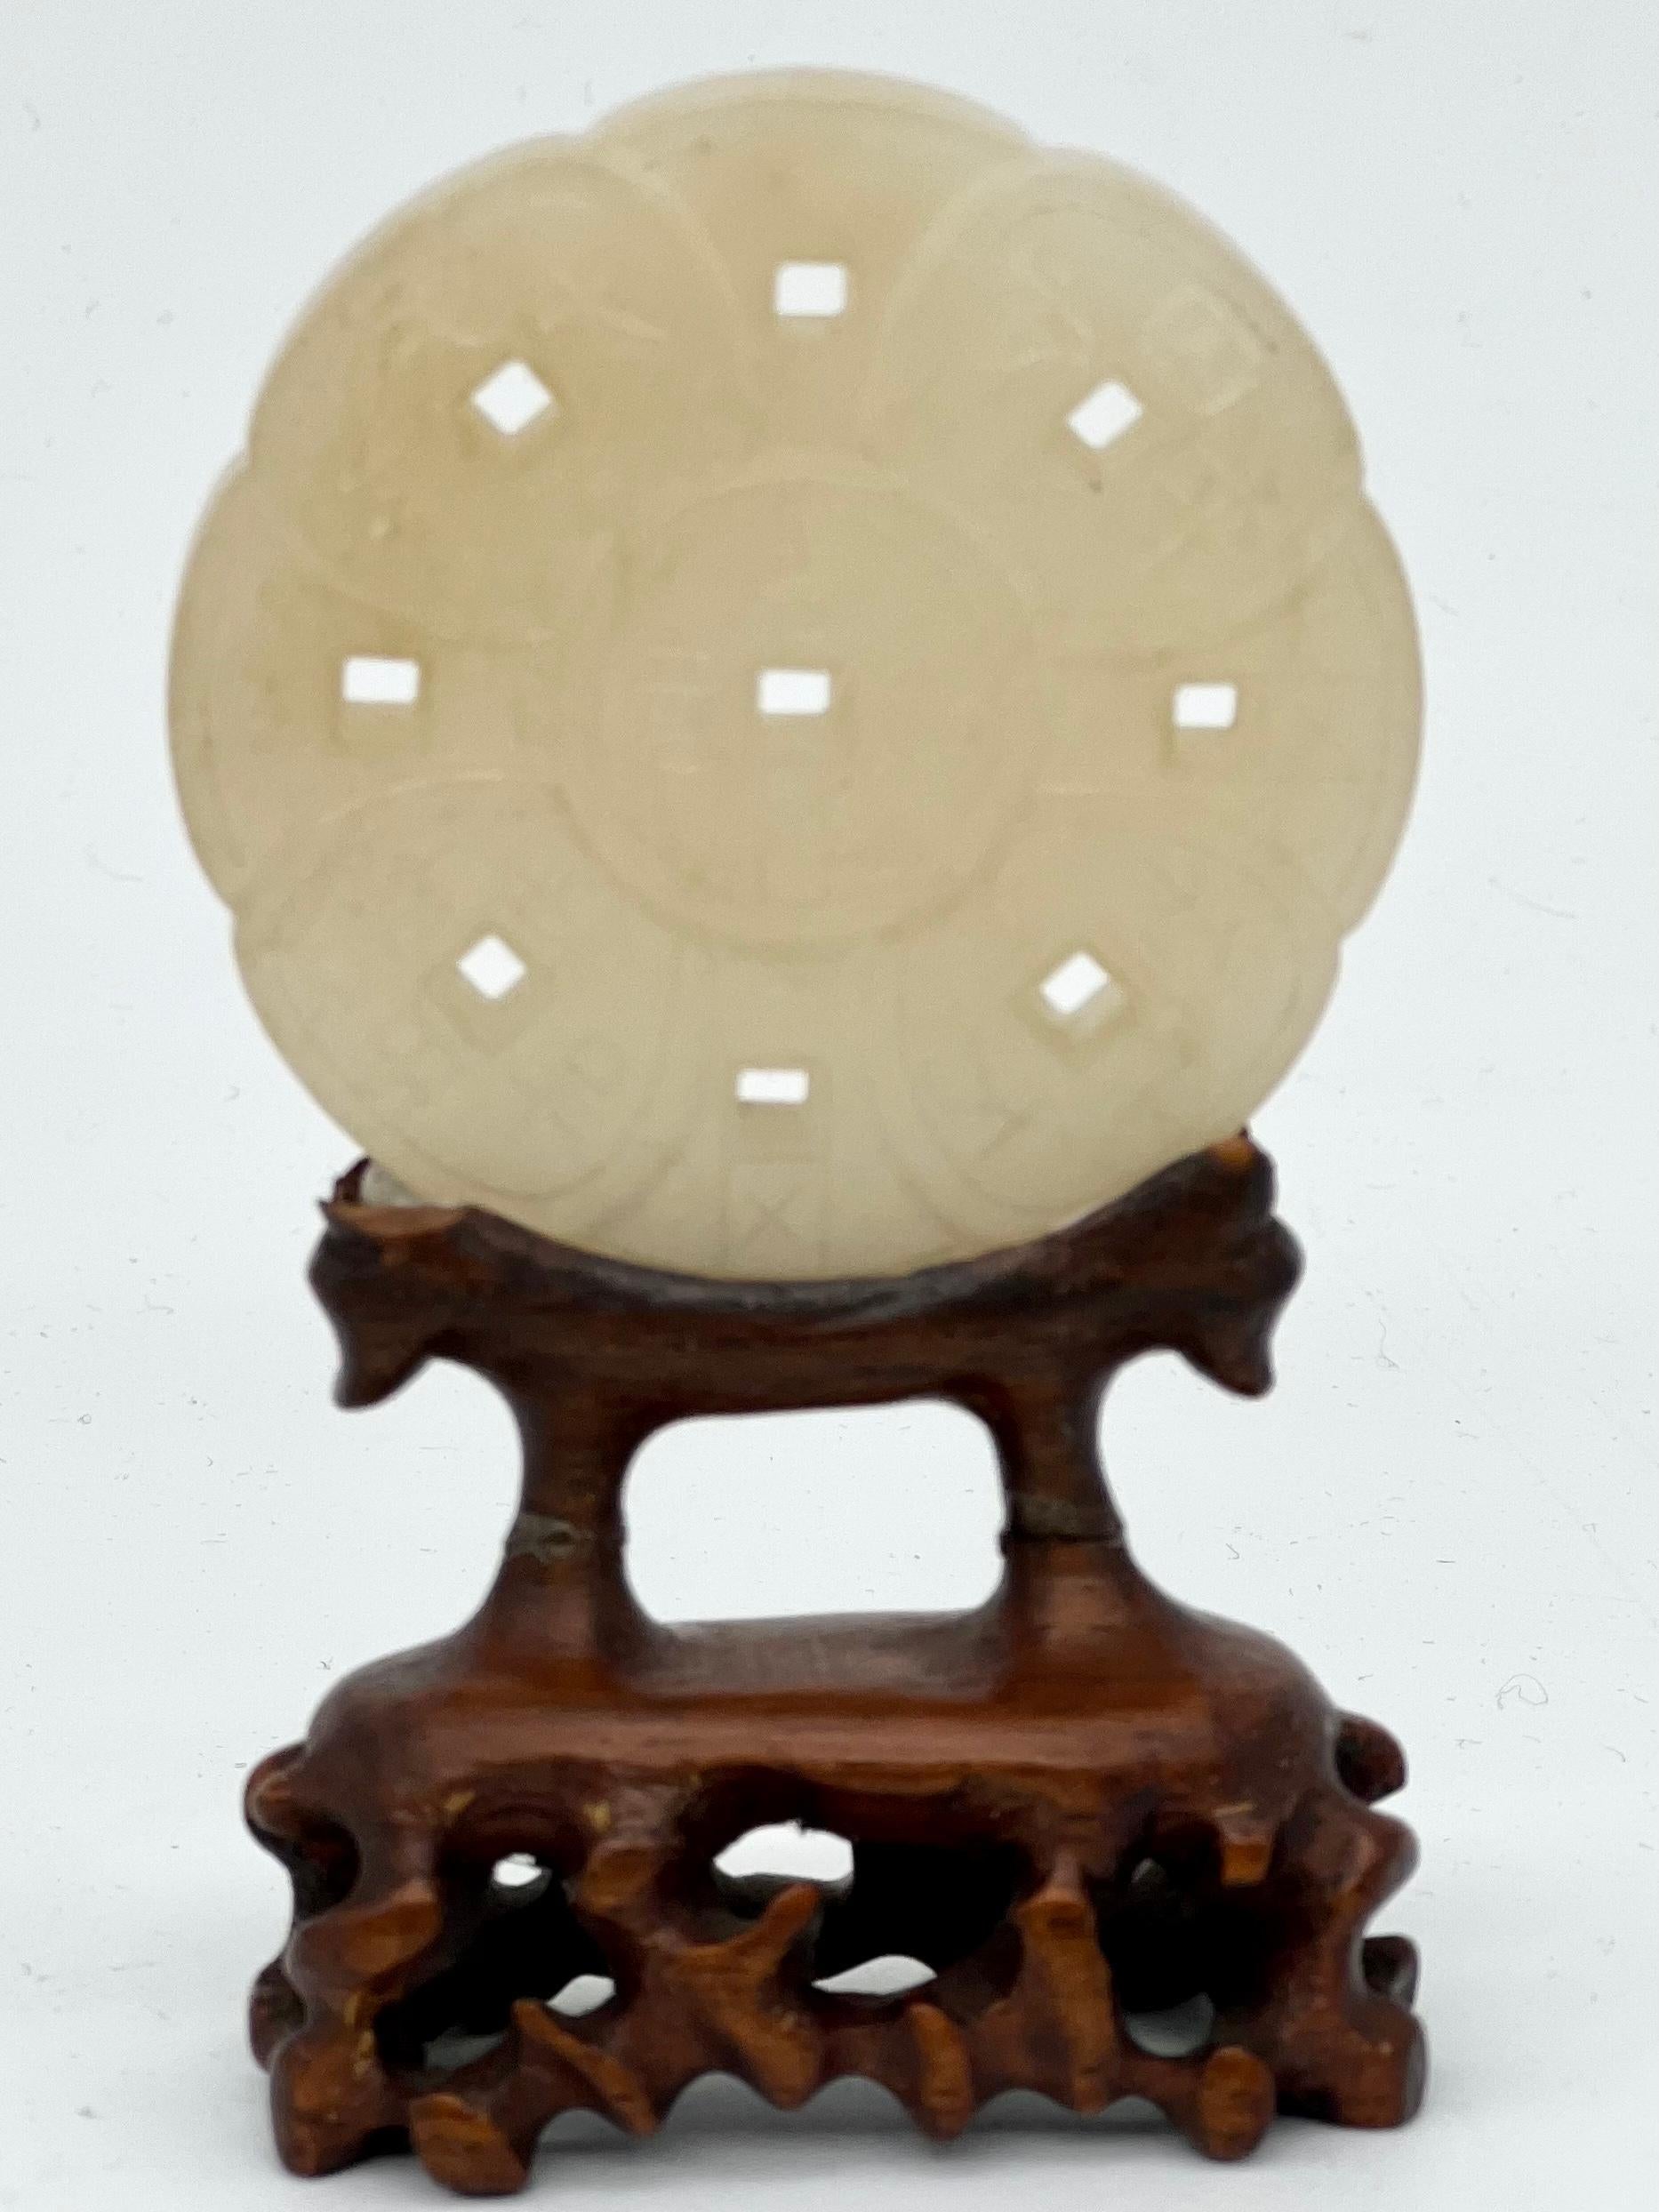 A Magnificent Antique Chinese Natural Nephrite Jade Plaque . 19th C

A CHINESE CELADON NEPHRITE JADE PLAQUE


Late 19th /early 20th Century



The foliate plaque incised with various characters.


Wooden stand included.


5.4cm in diameter.


In